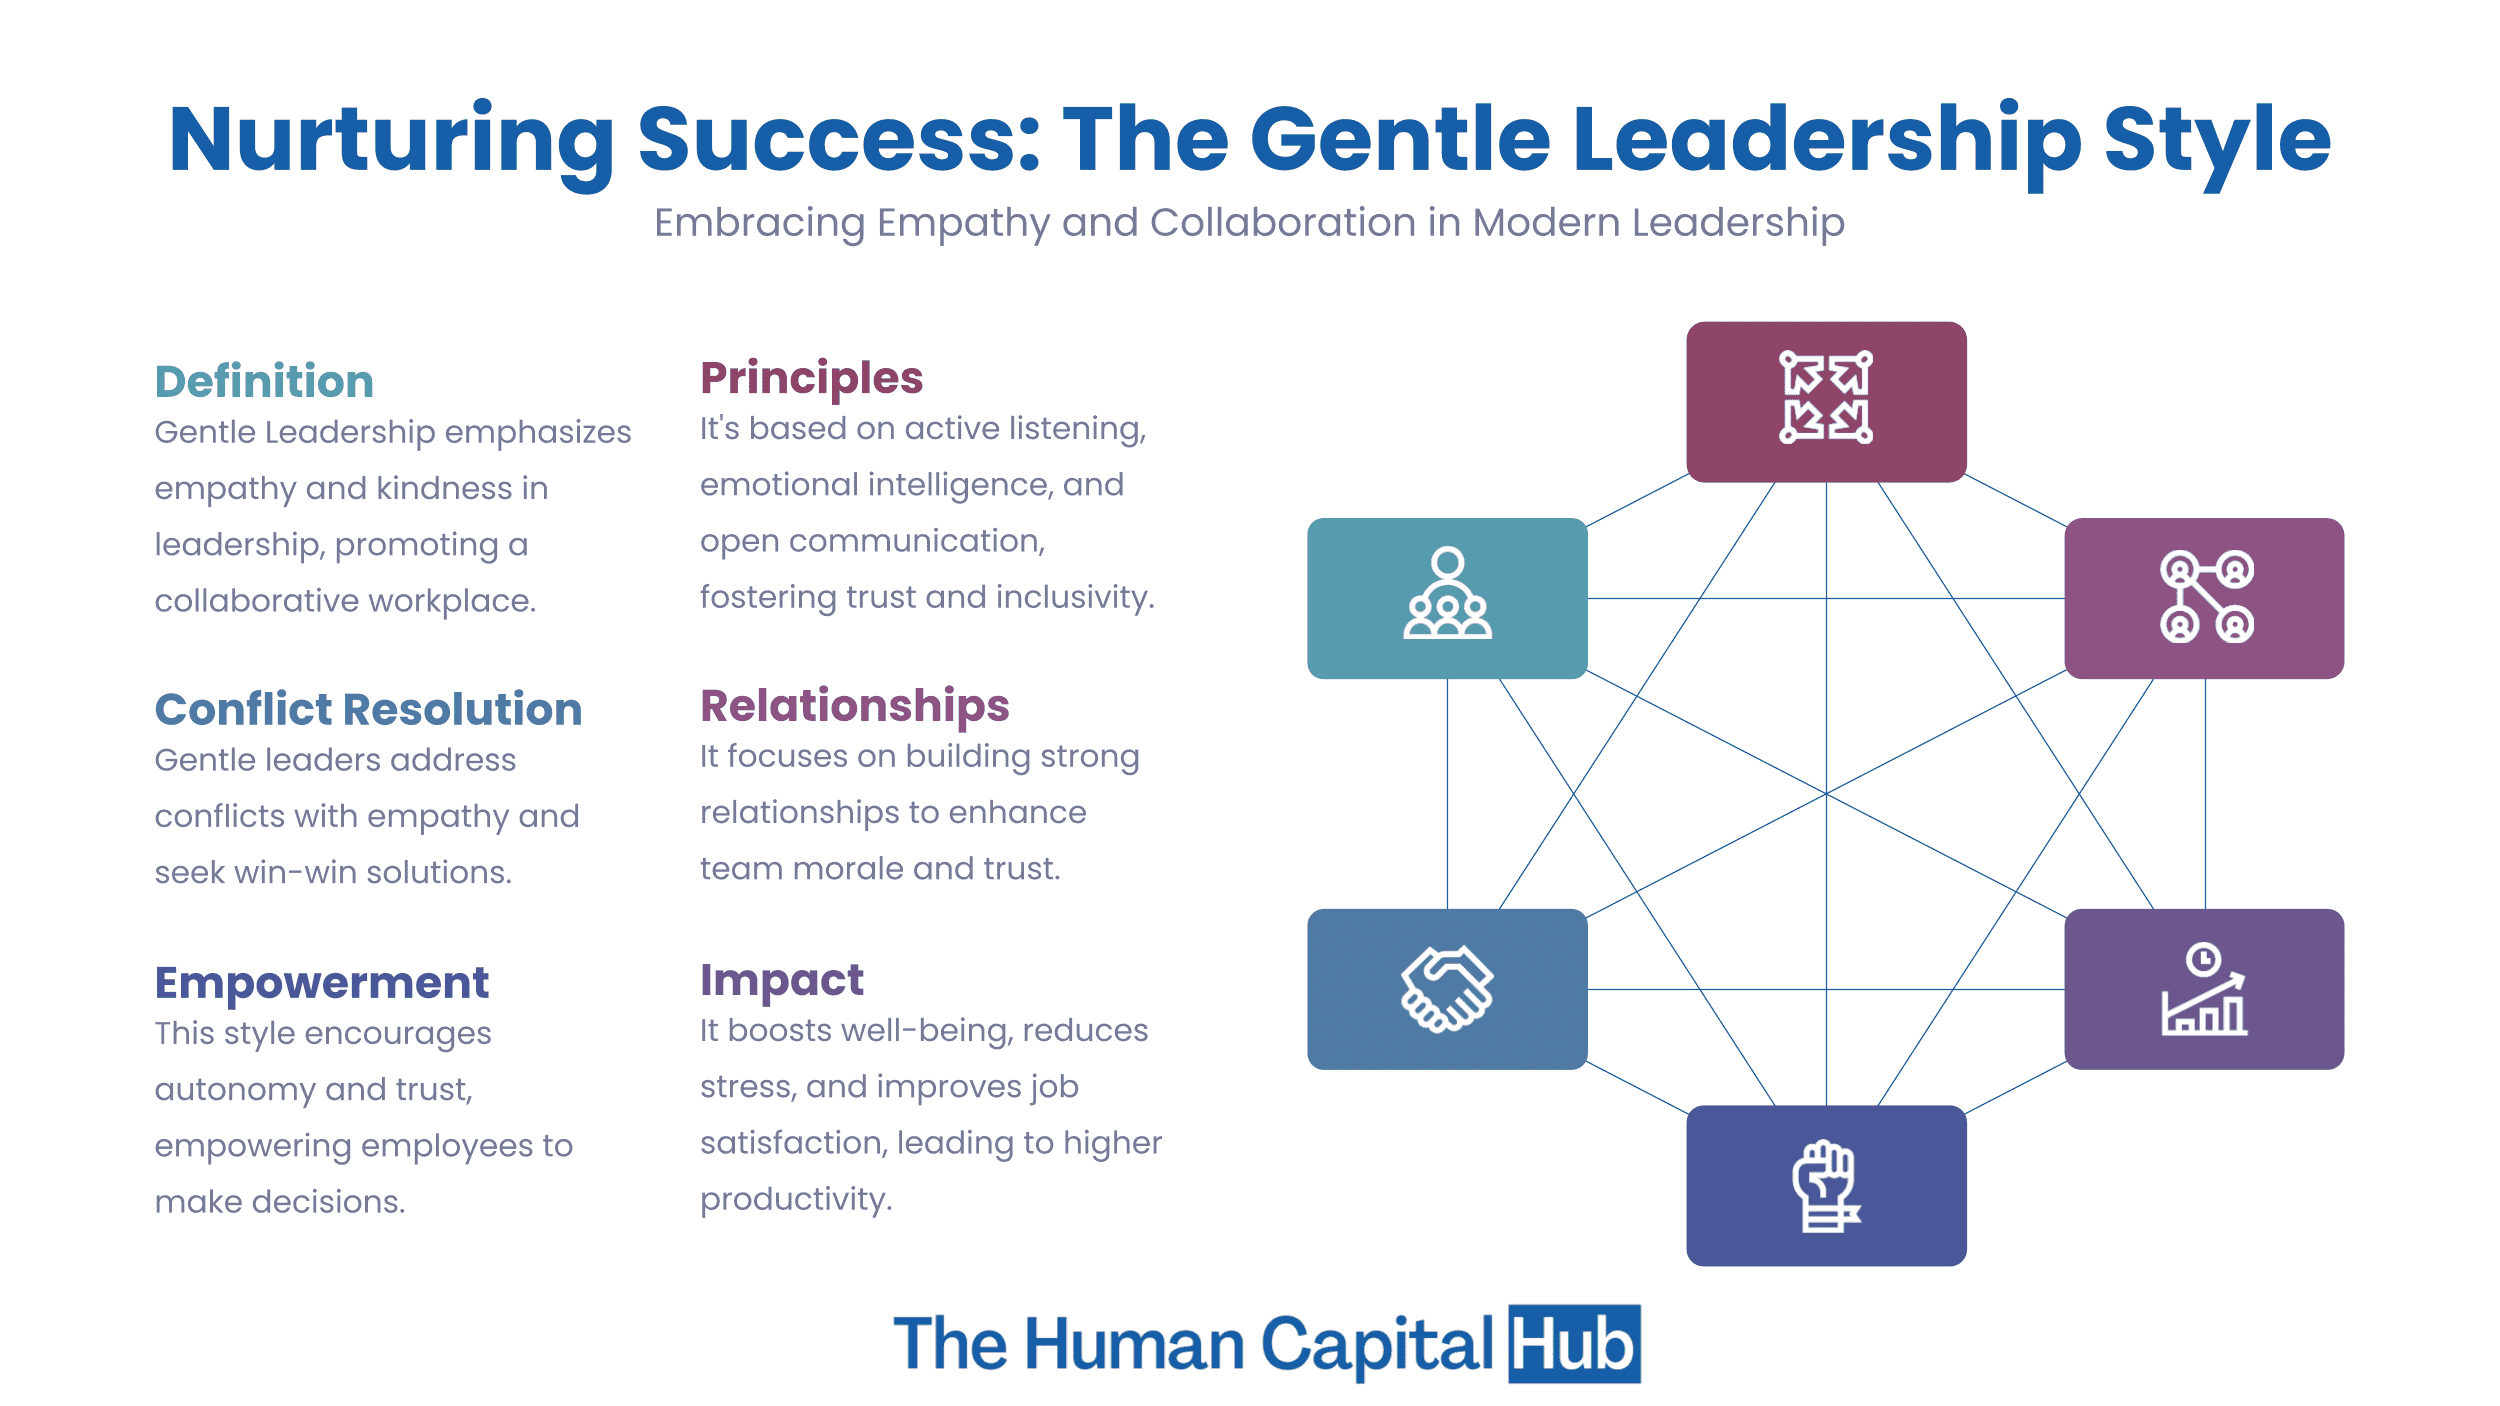 What is the Gentle of Leadership Style?